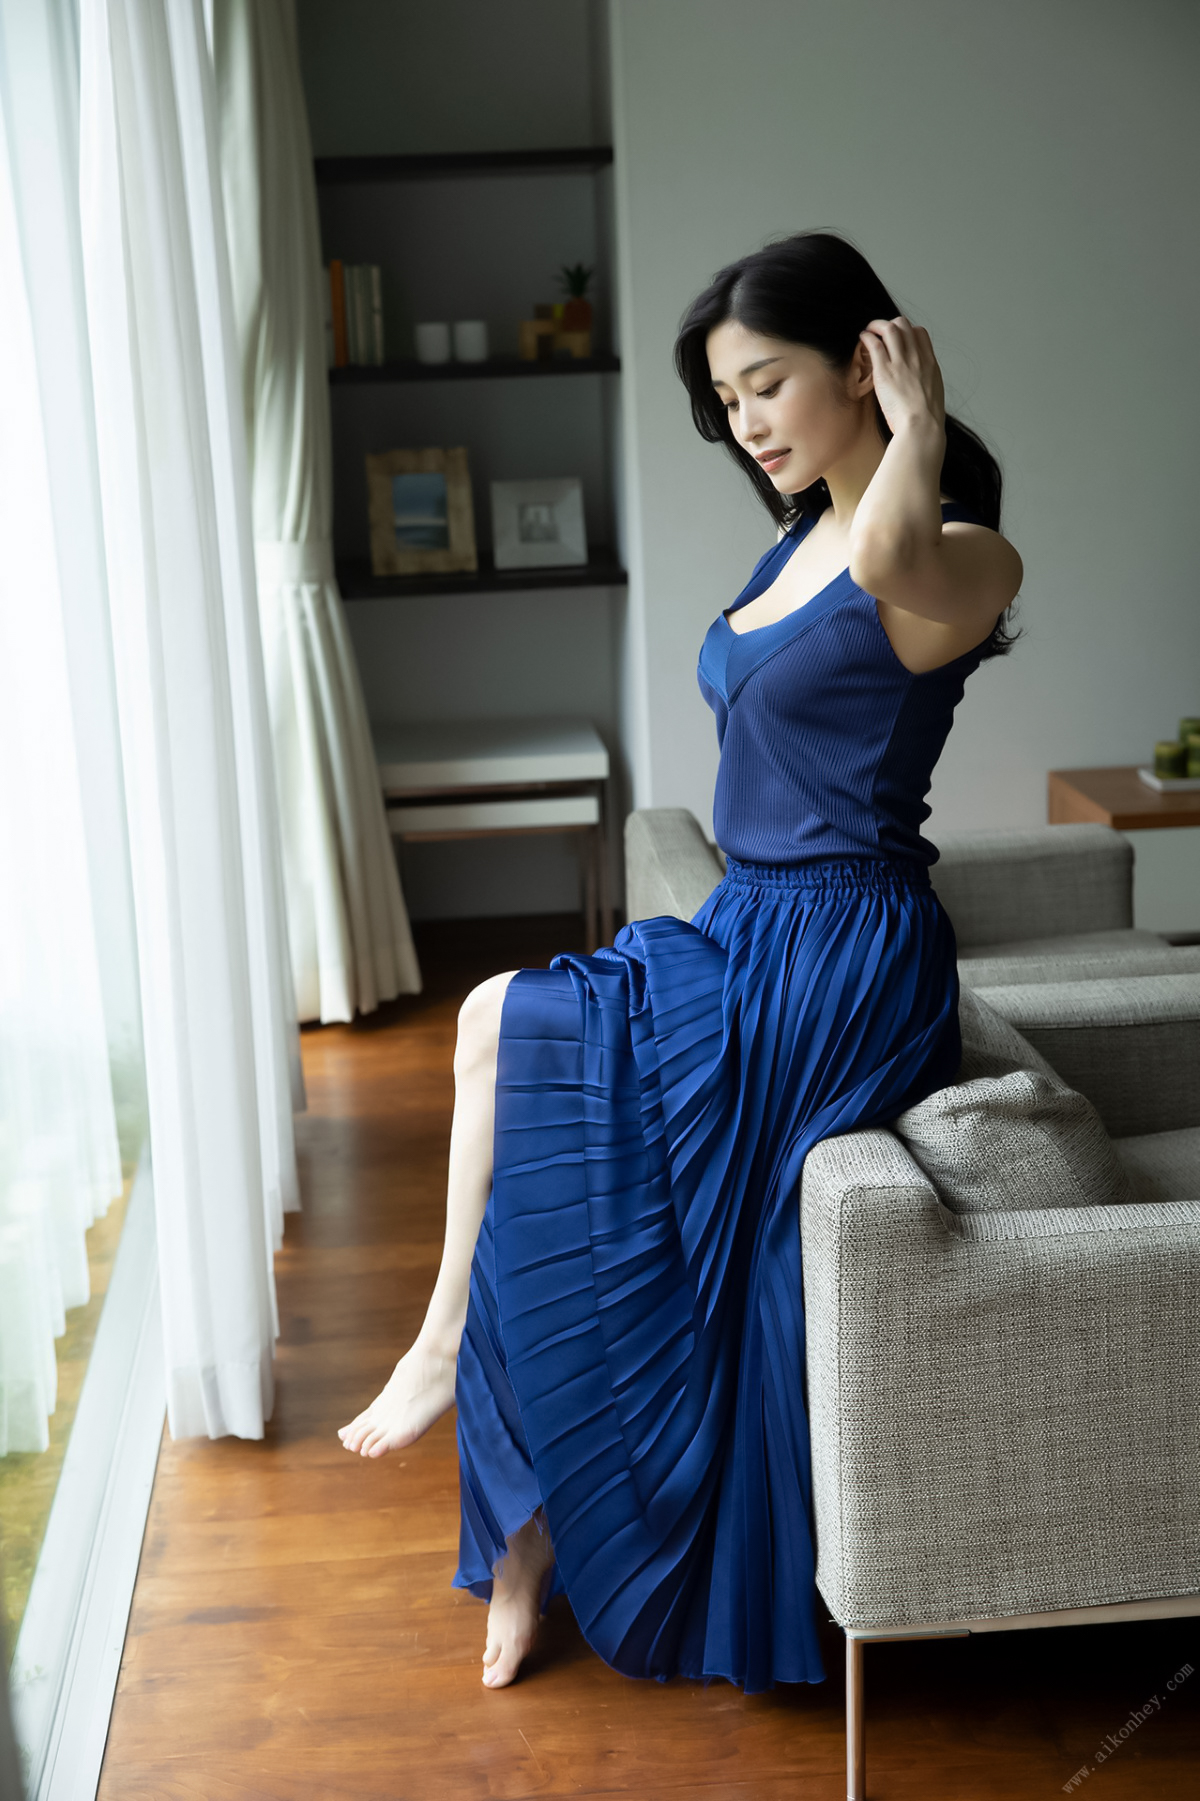 Women Model Indoors By The Window Women Indoors Asian Blue Dress Japanese Model Smiling Long Hair Br 1200x1801